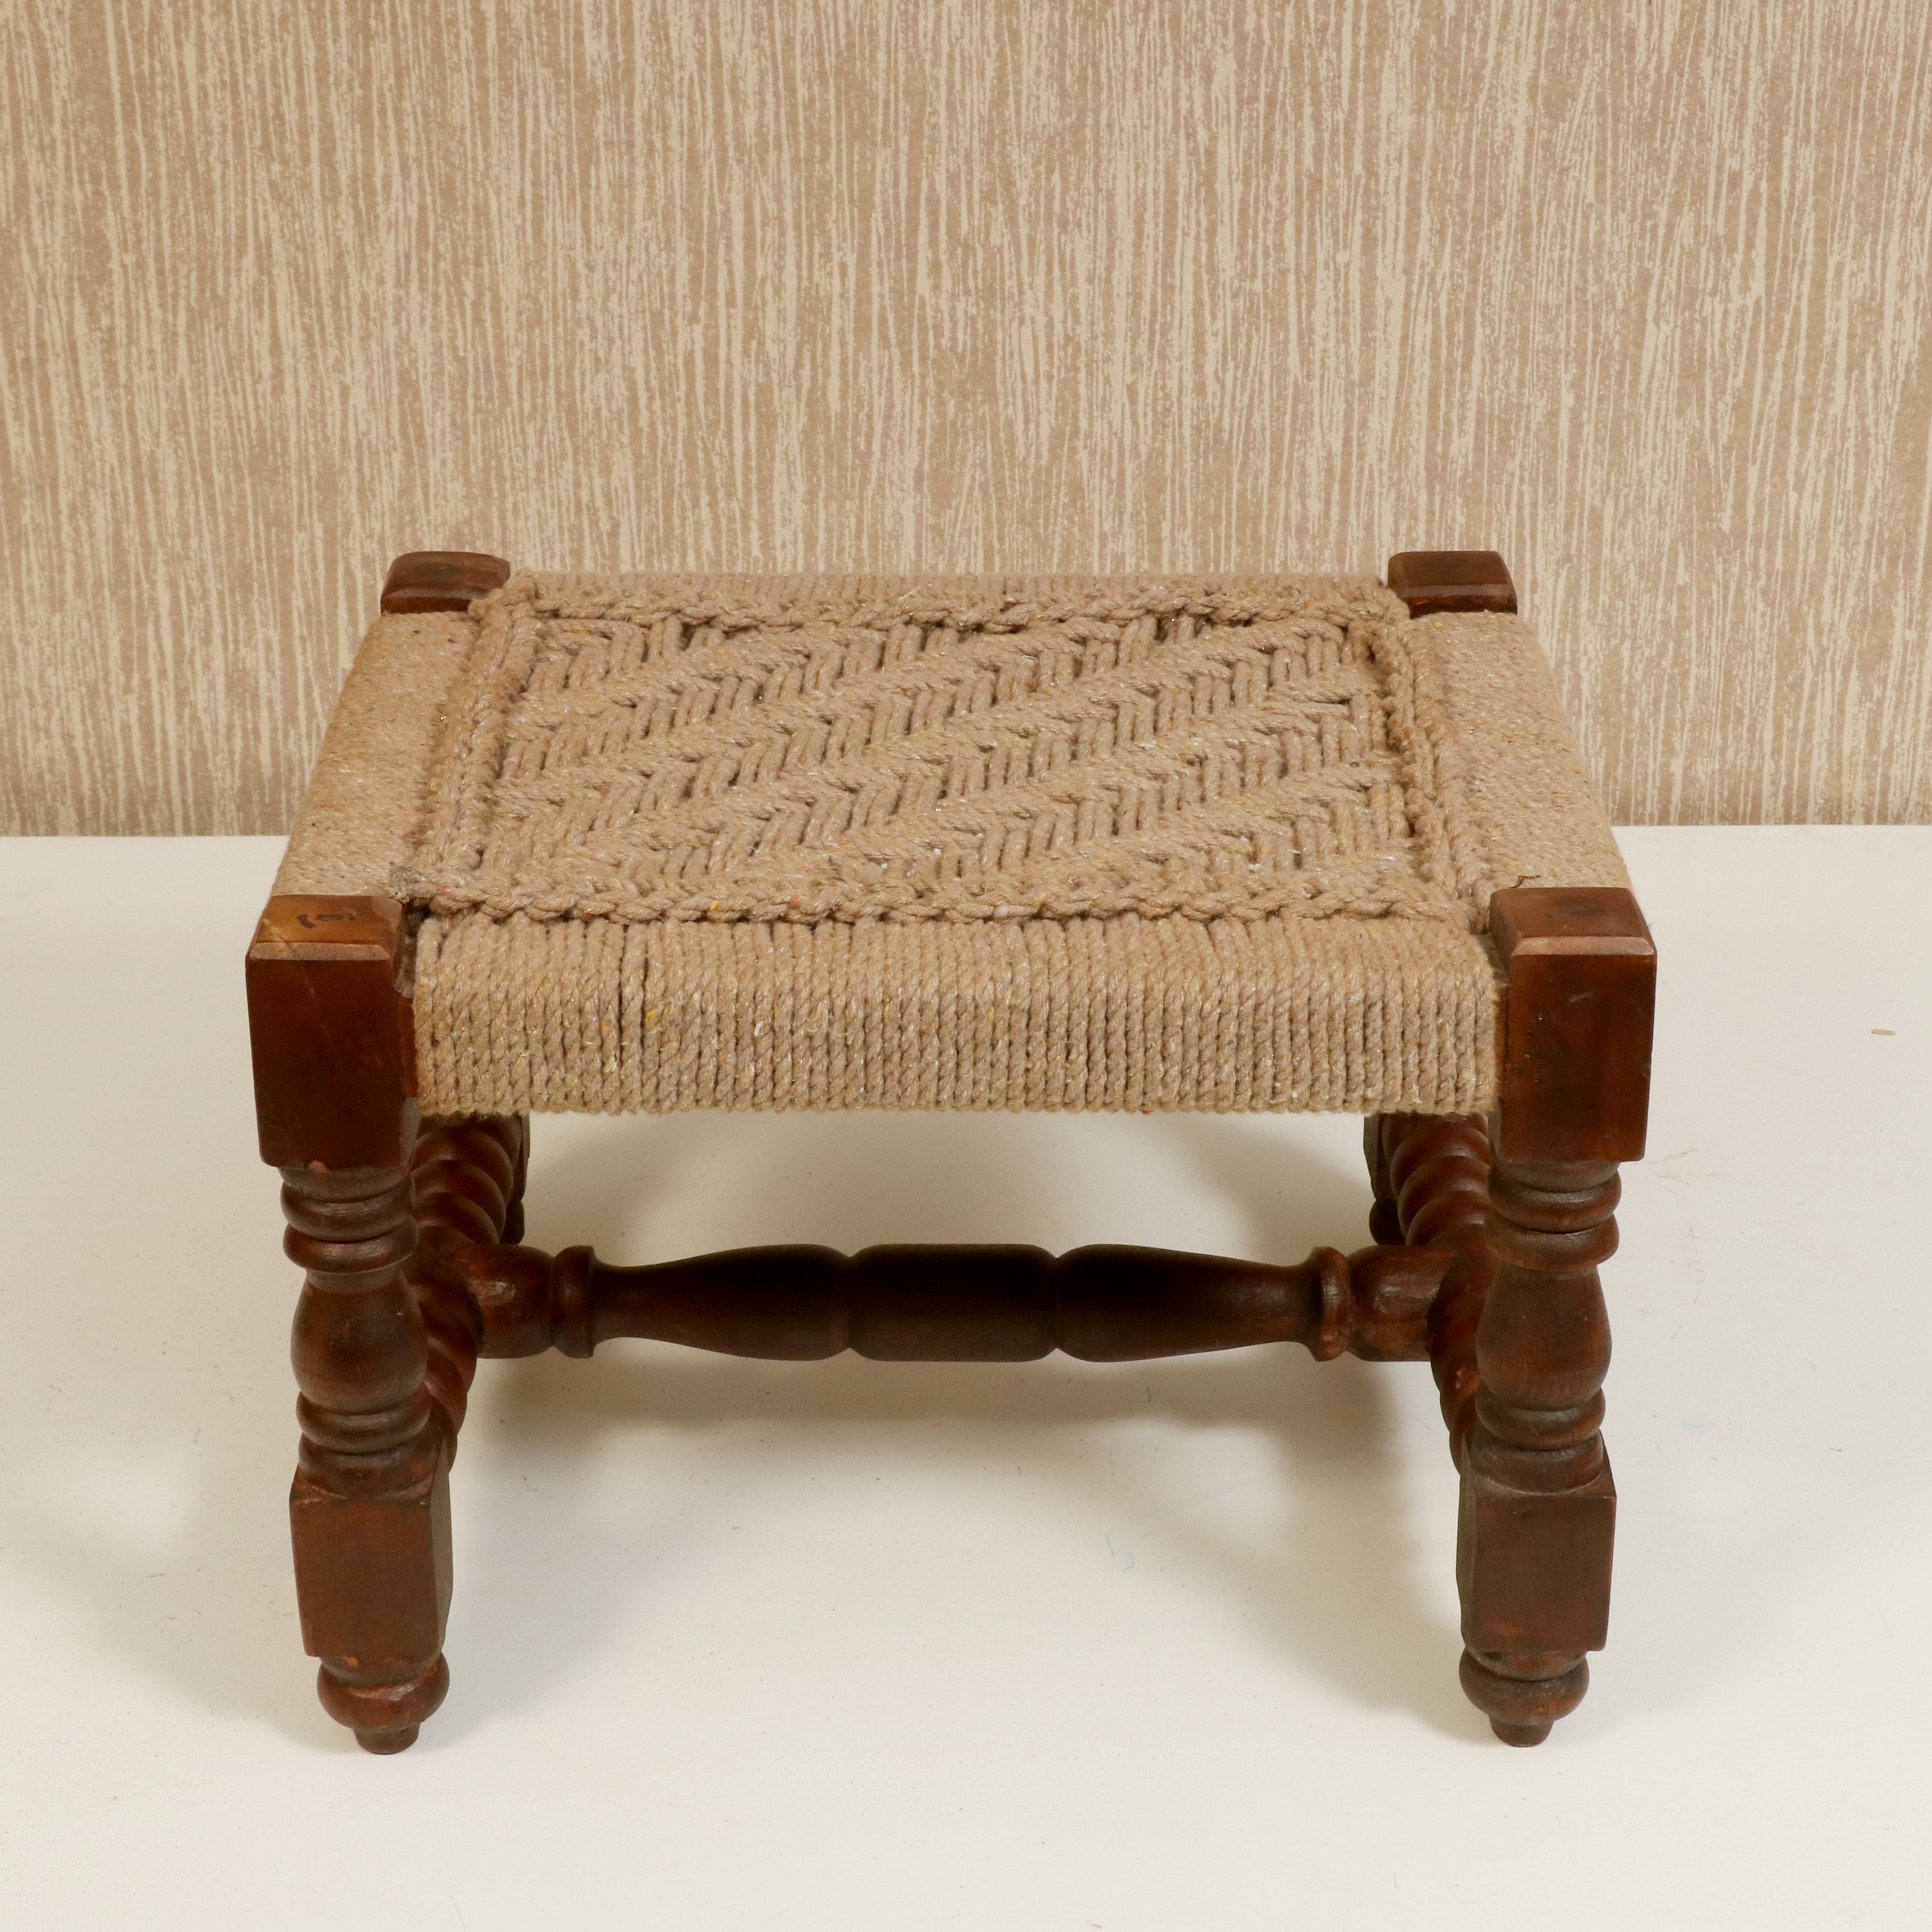 Woven Low Stool camel colour Stool